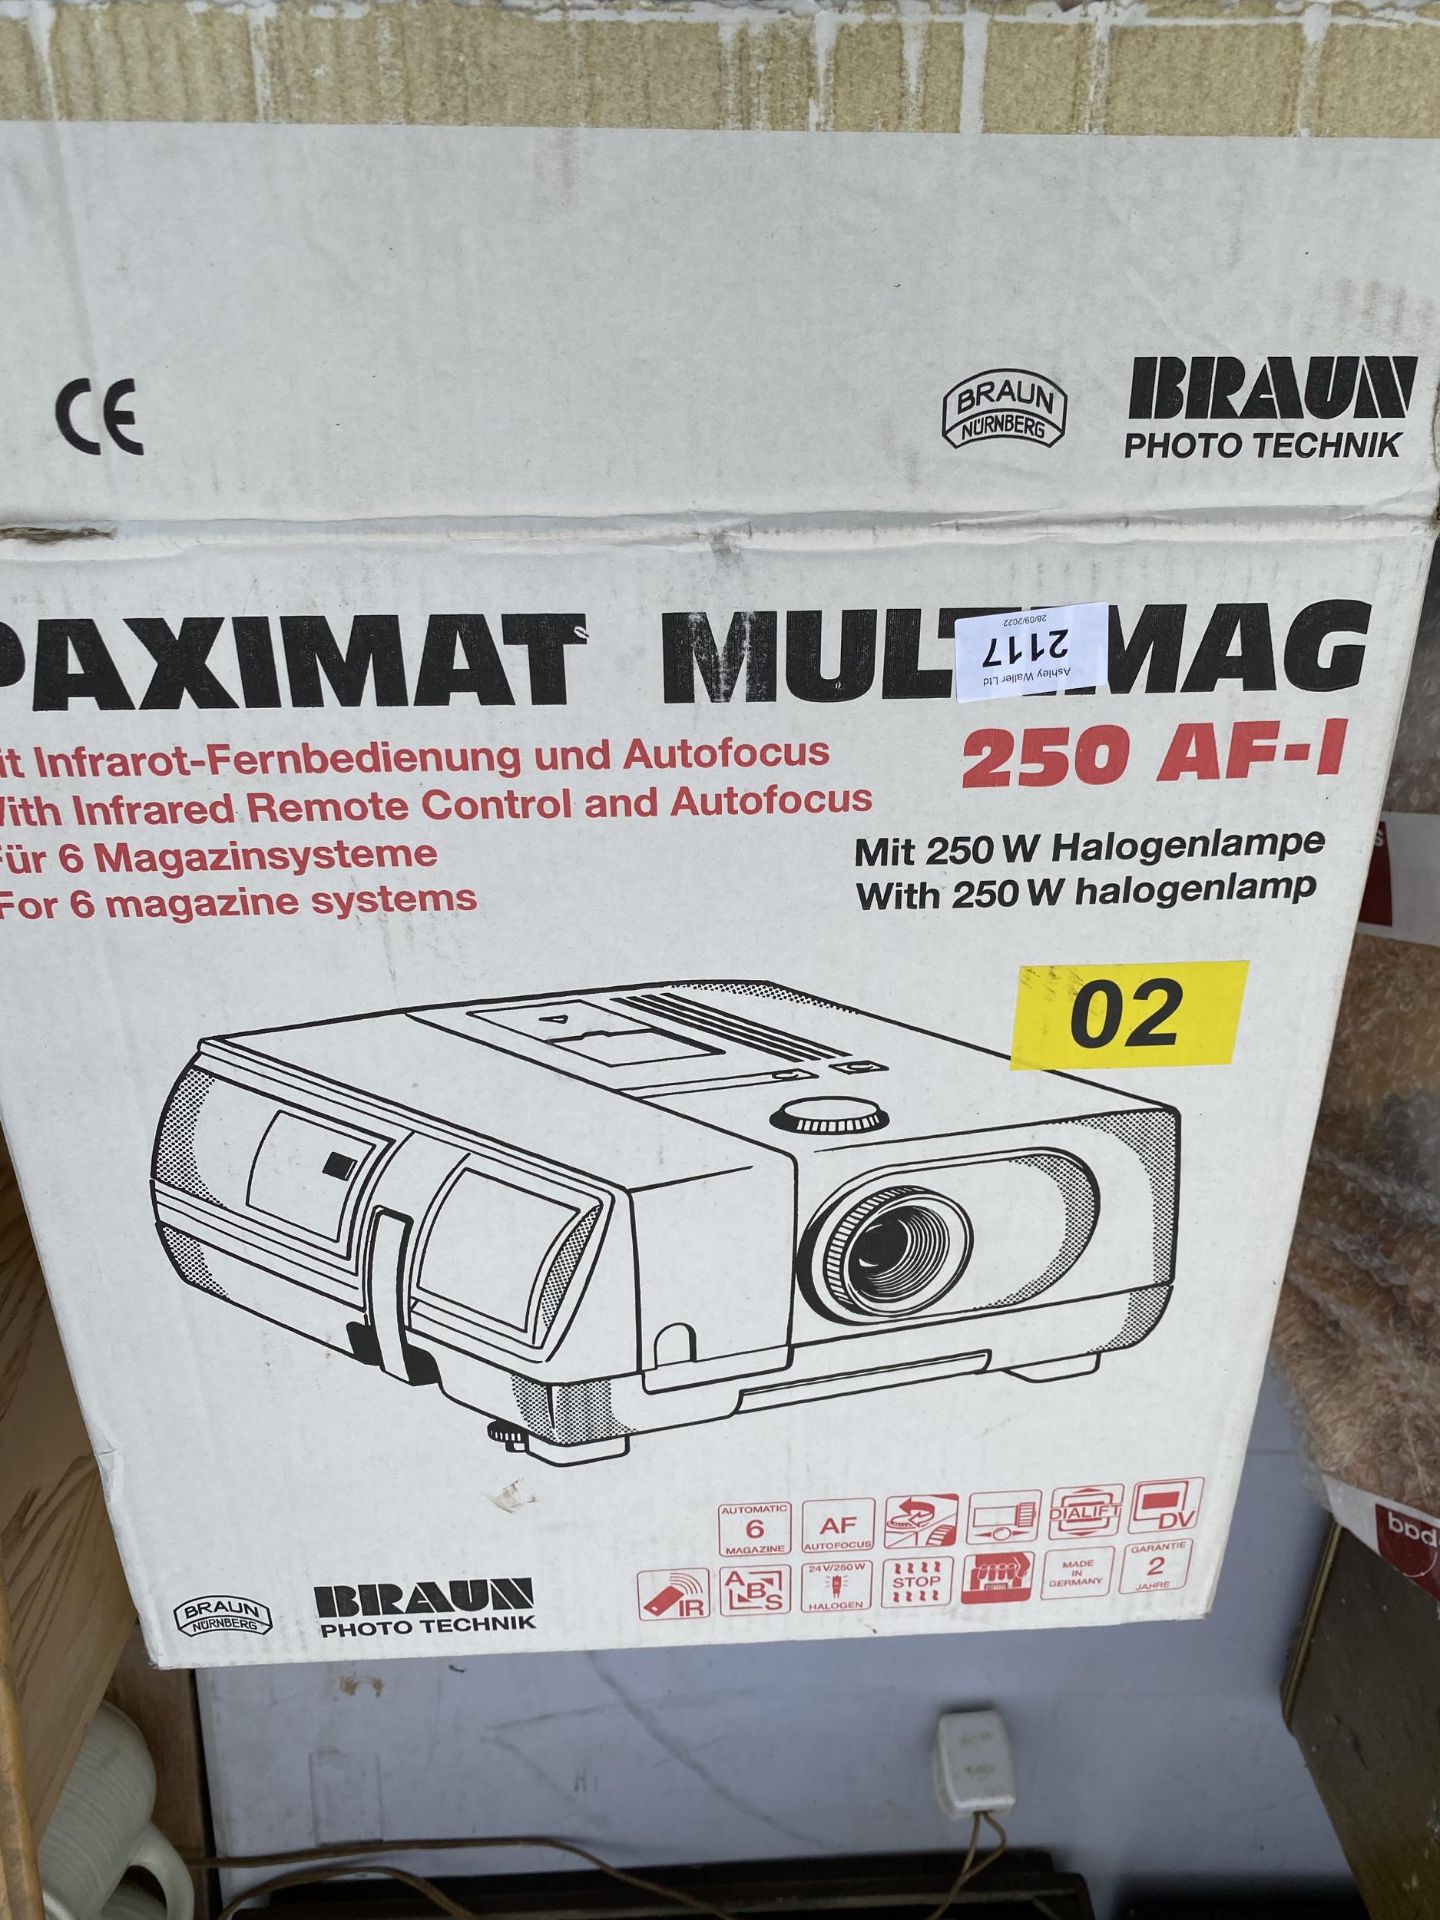 A PAXIMAT MULTIMAG PROJECTOR - Image 2 of 2